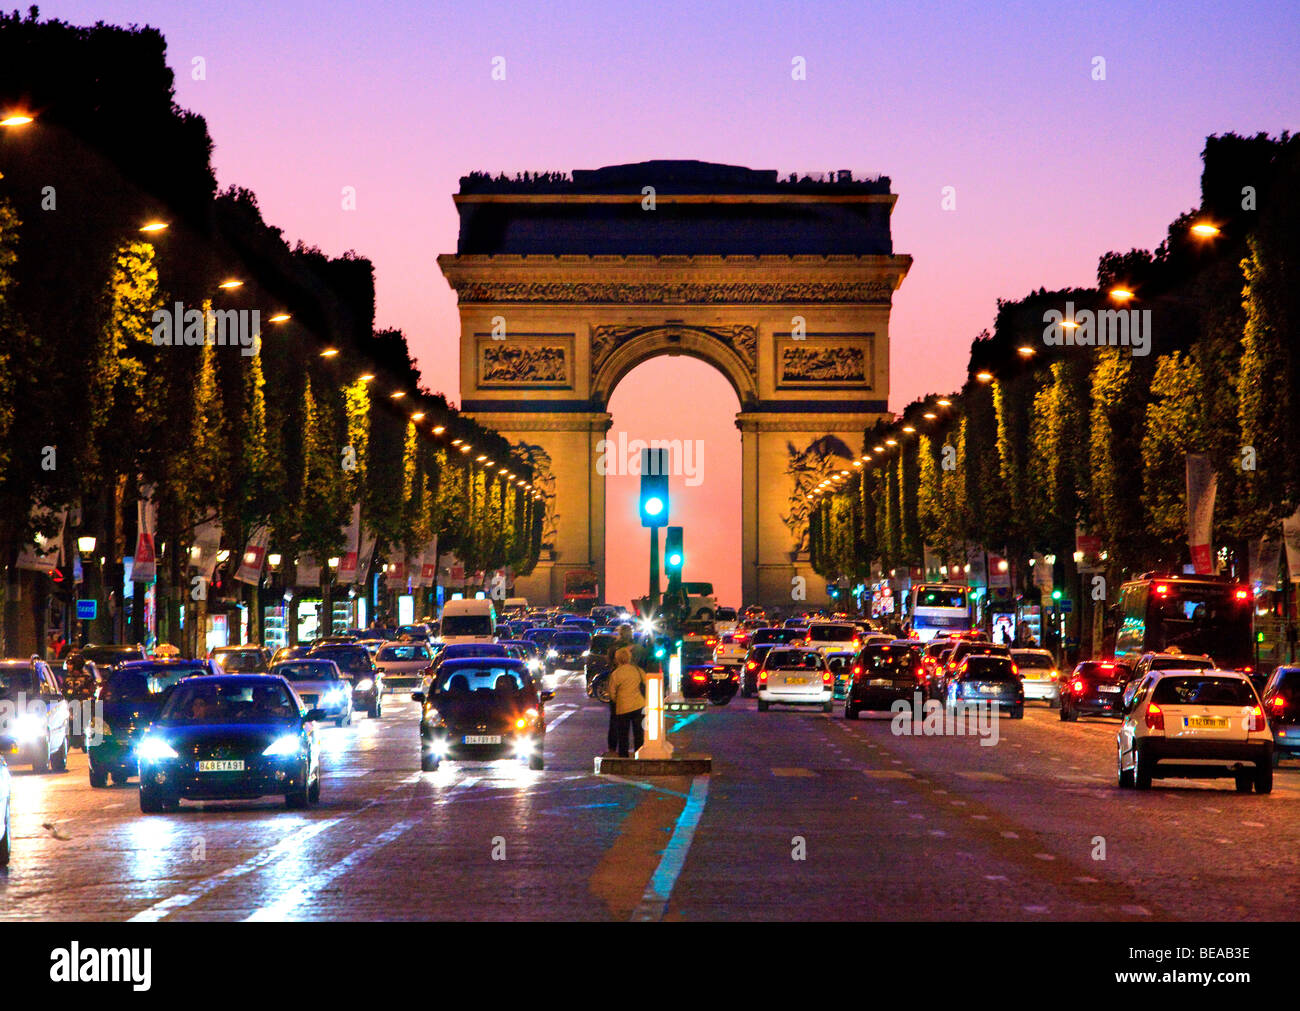 Paris at Night  Arc de Triomphe and Champs Elysees Stock Photo